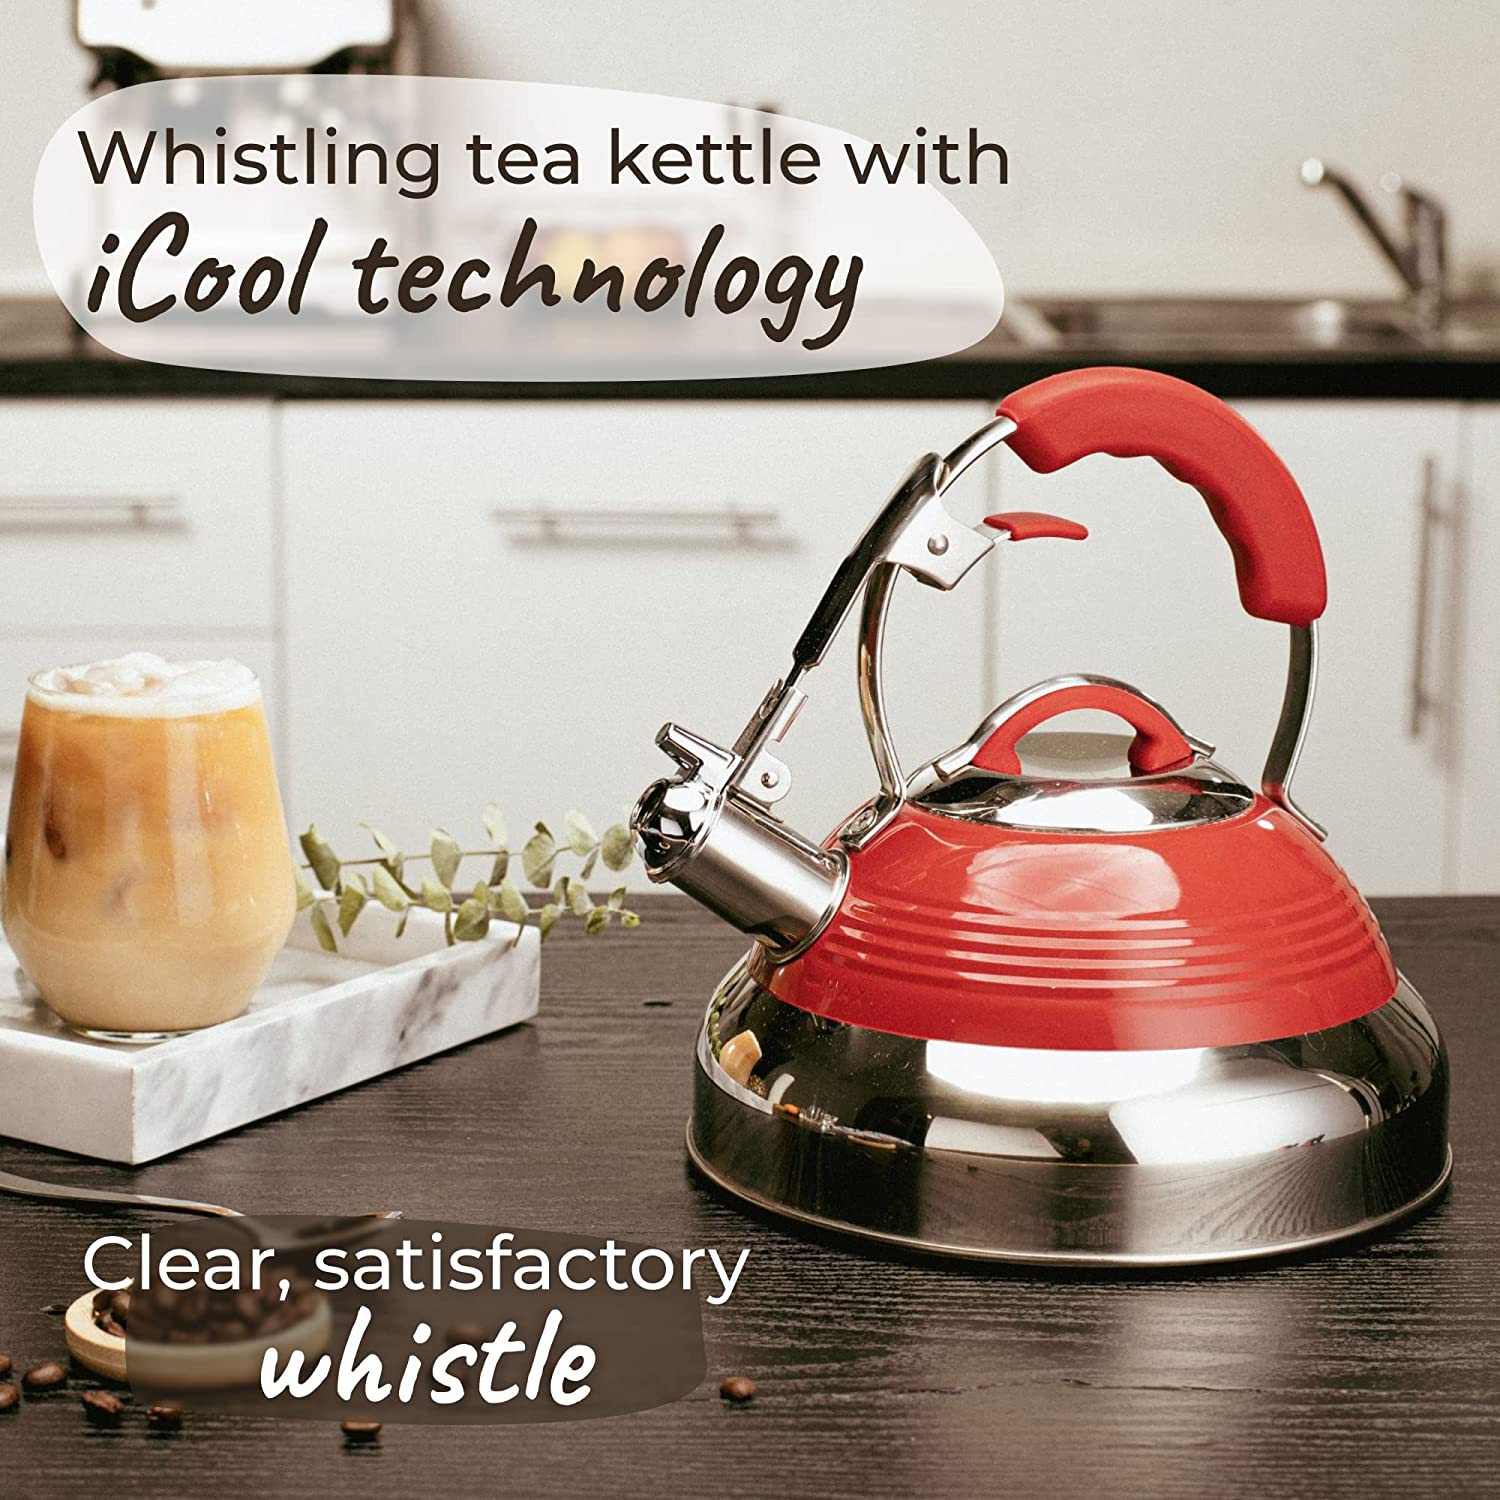 Pykal Retro Whistling Tea Kettle for Stove Top - 2.6l - Red Vintage Stainless Steel Kettles w/ iCool Handle Technology - Whistle Teapot for Stovetop...